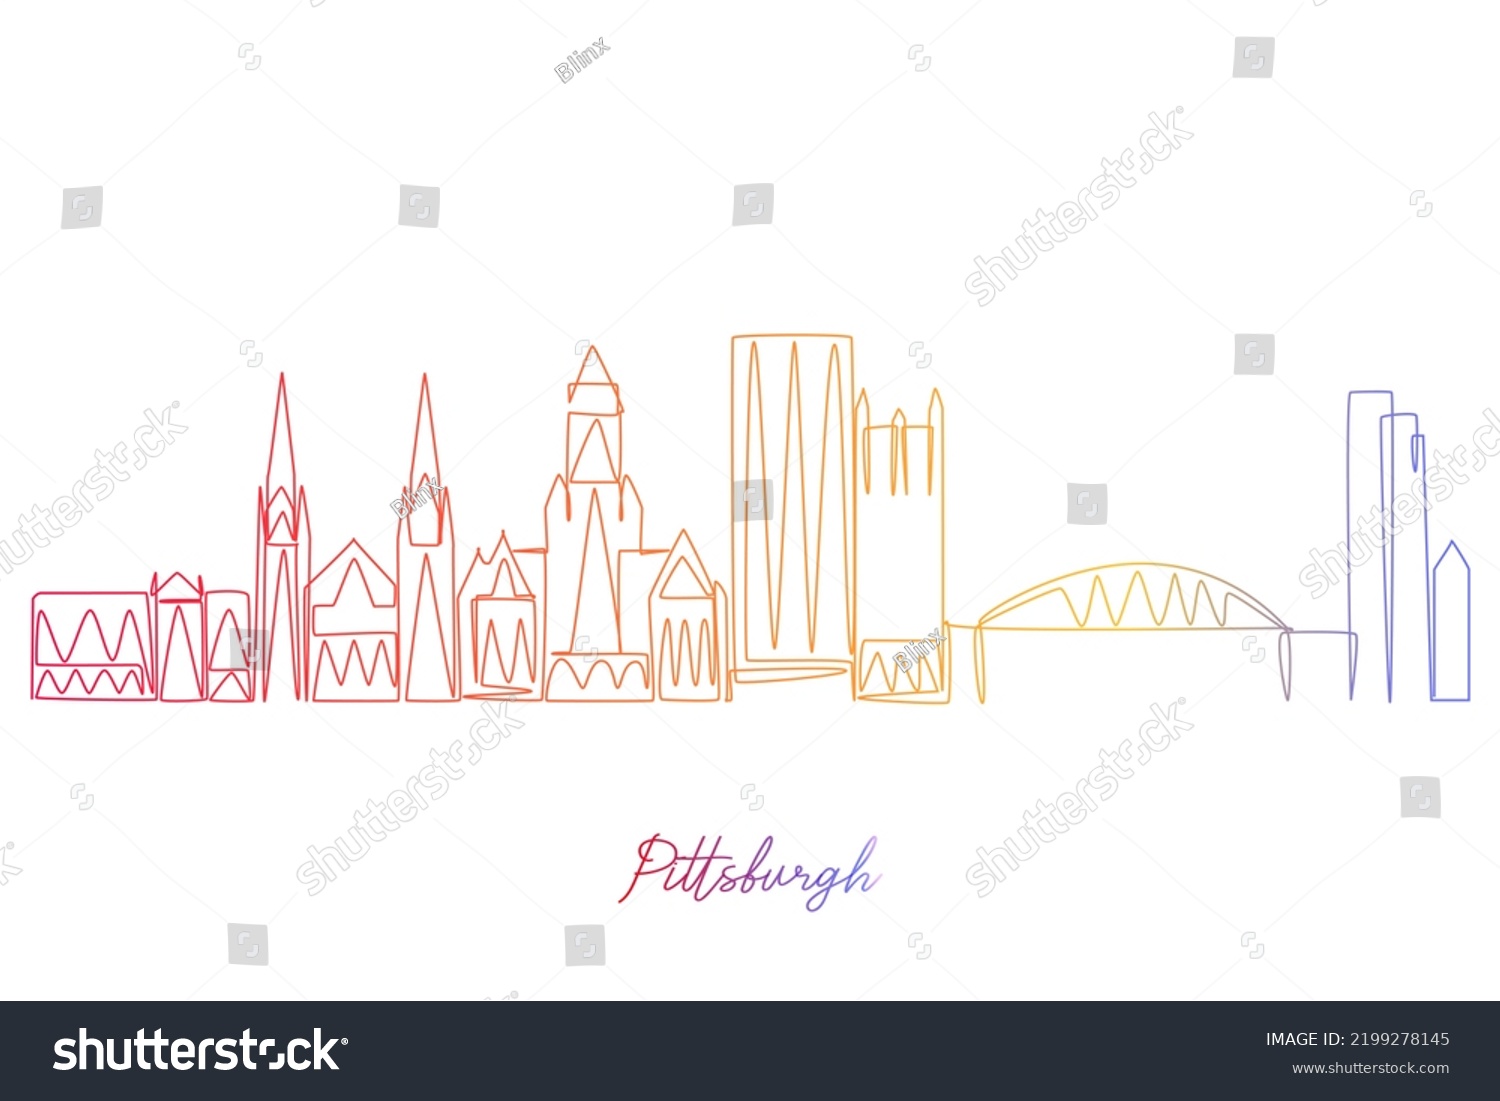 SVG of Continuous Single Line drawing of Pittsburg Pennsylvania USA. Simple gradient colored line hand drawn style design for travel and destination concept svg